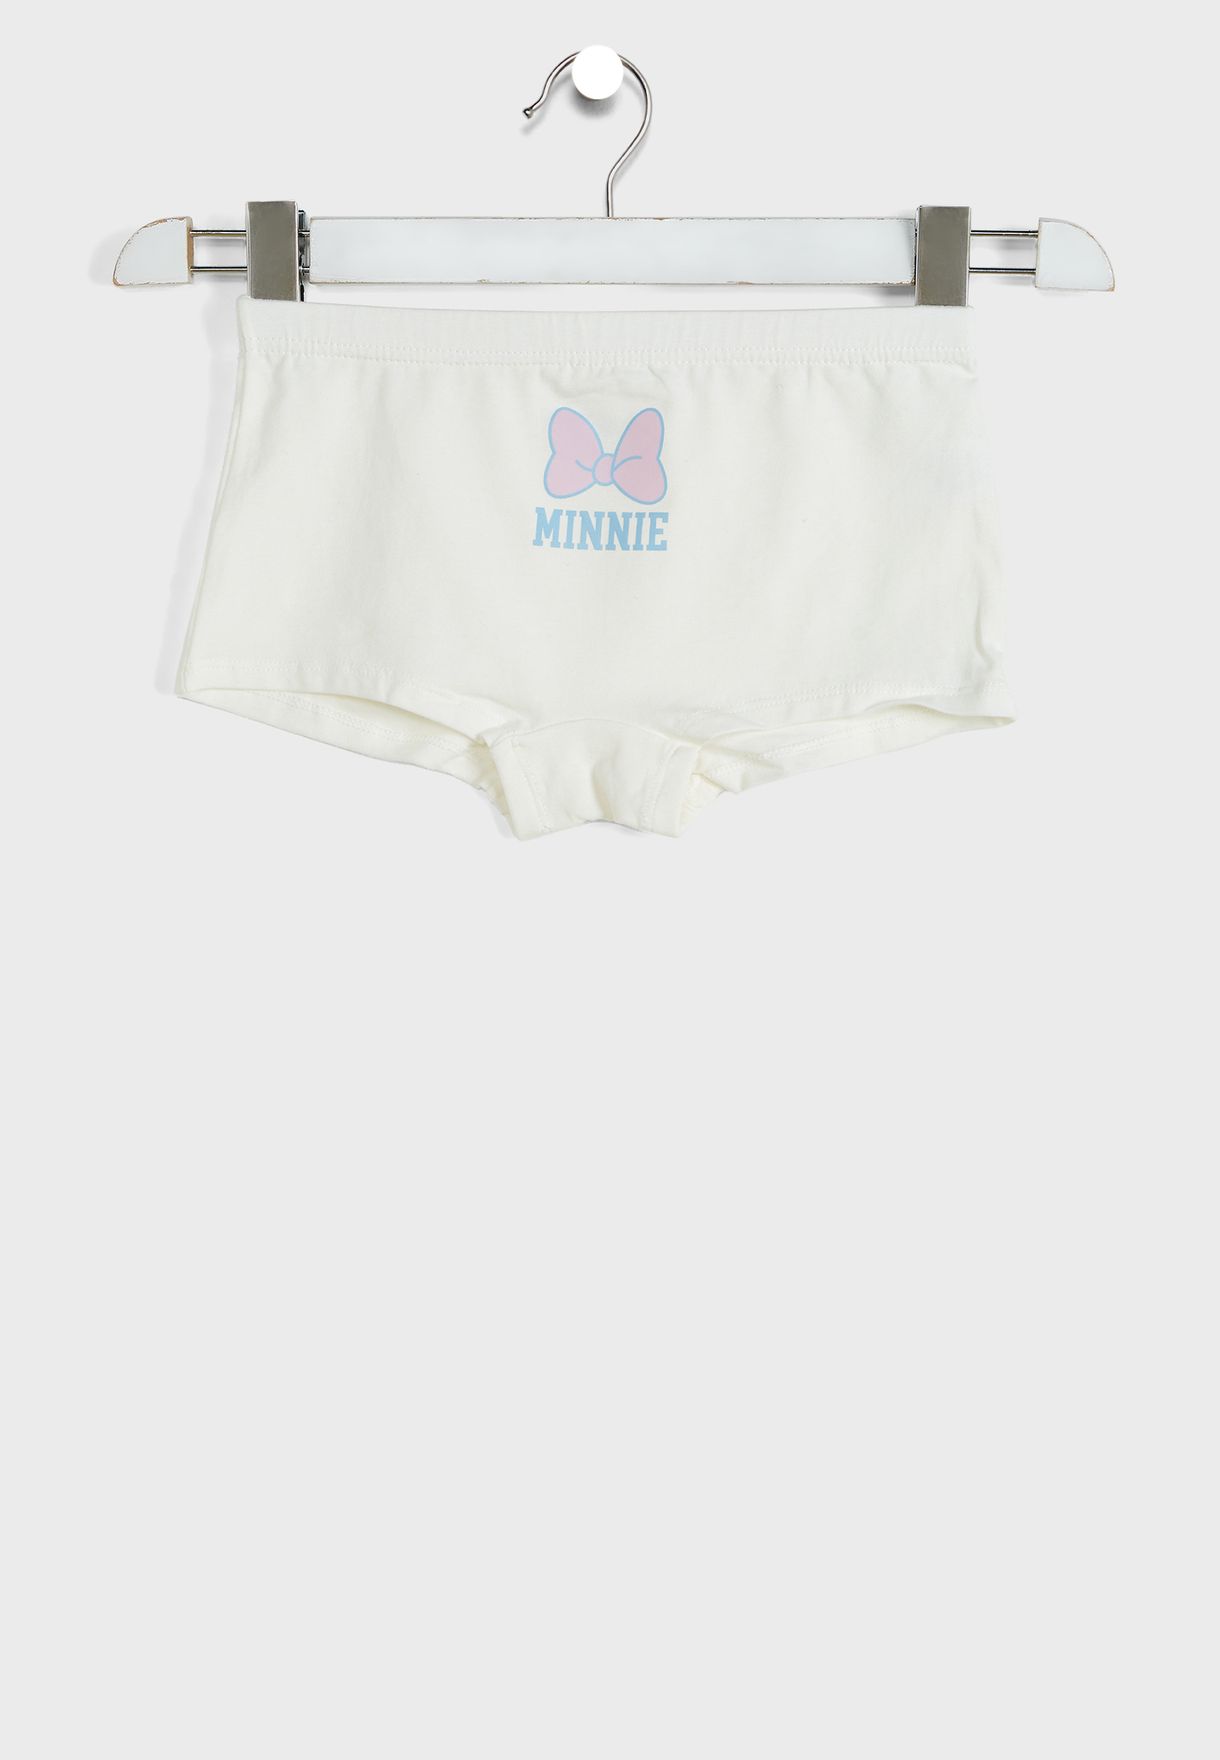 Youth 3 Pack Minnie Mouse Boxers